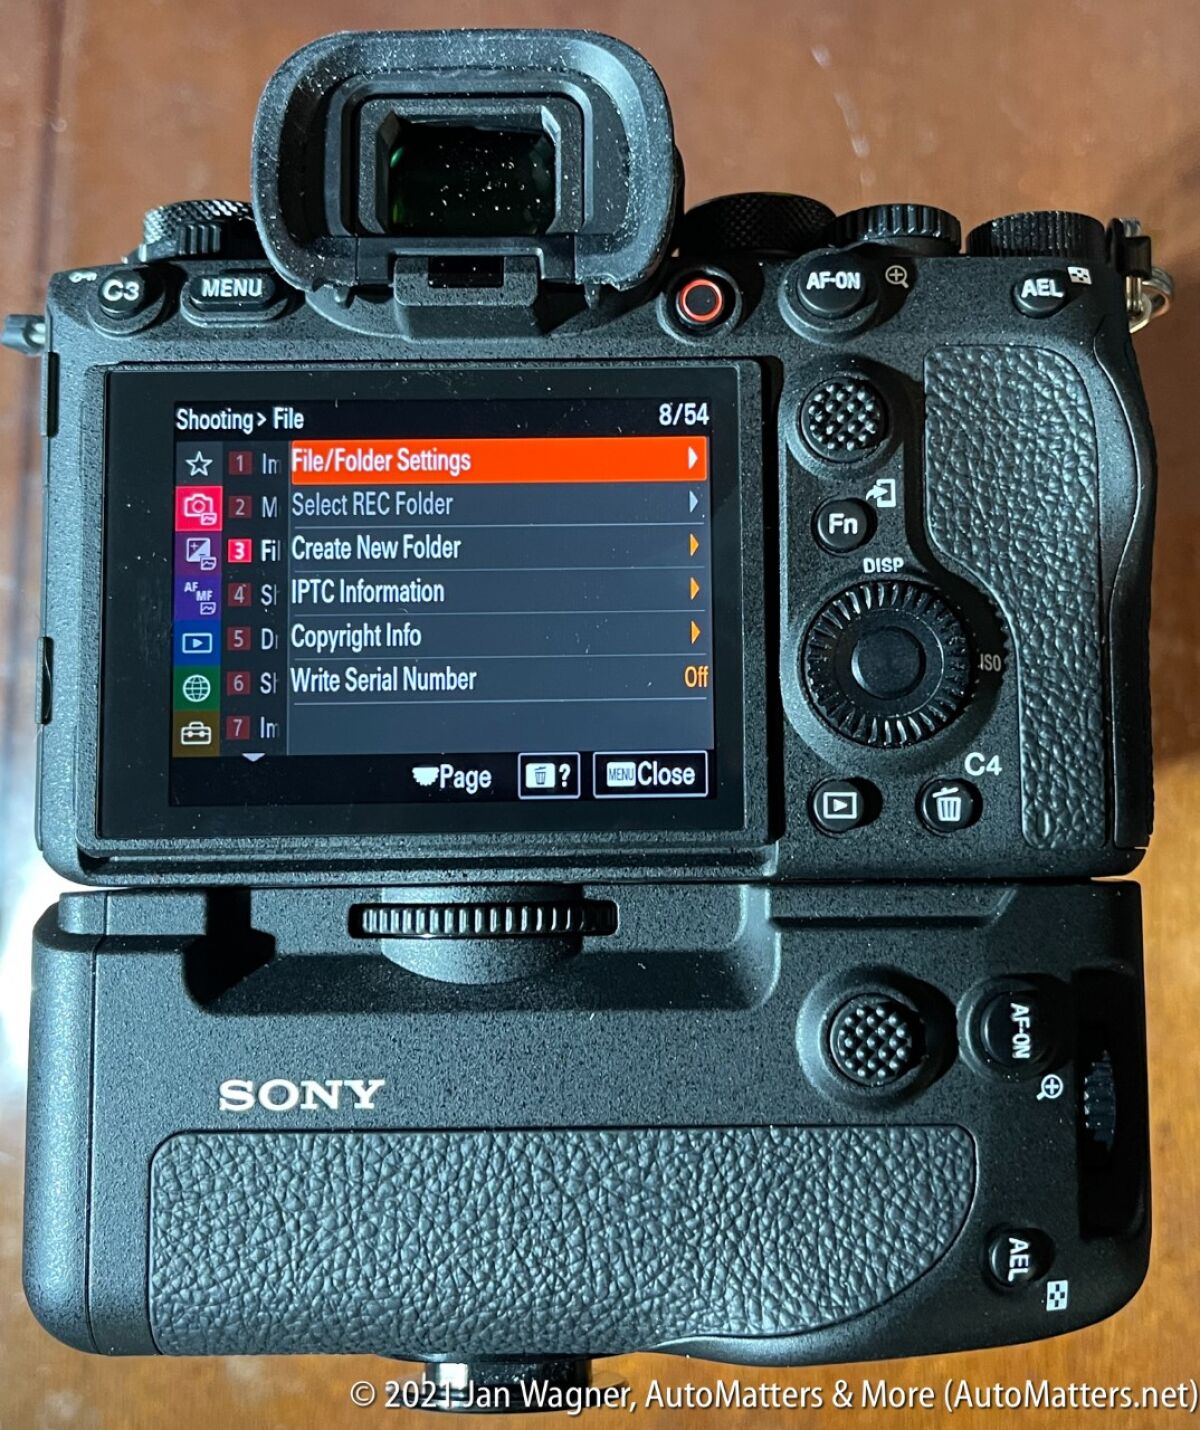 Sony Alpha 1 with its many programmable buttons